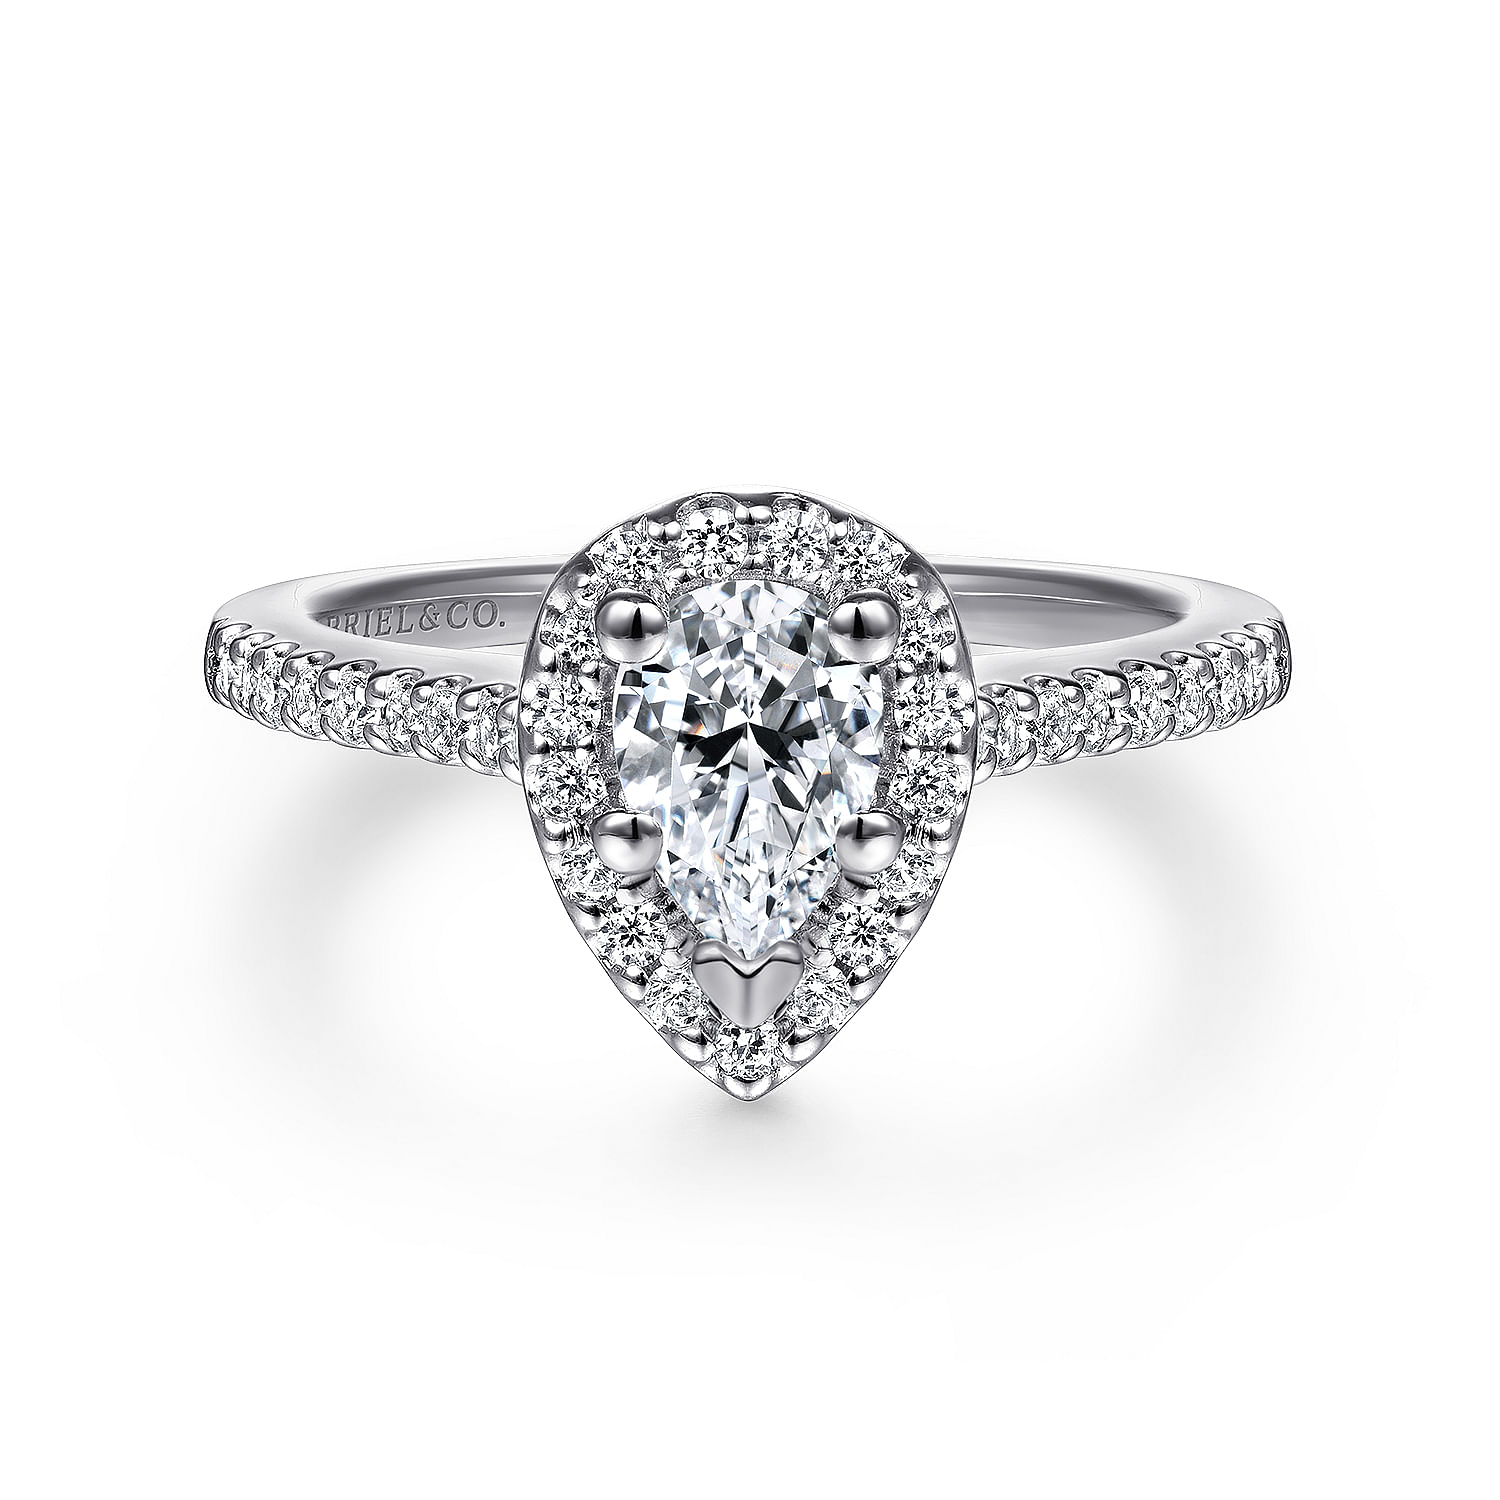 Details about   0.80 Carat Pear Cut Diamond Halo Accented Engagement Ring 14K White Gold Plated 